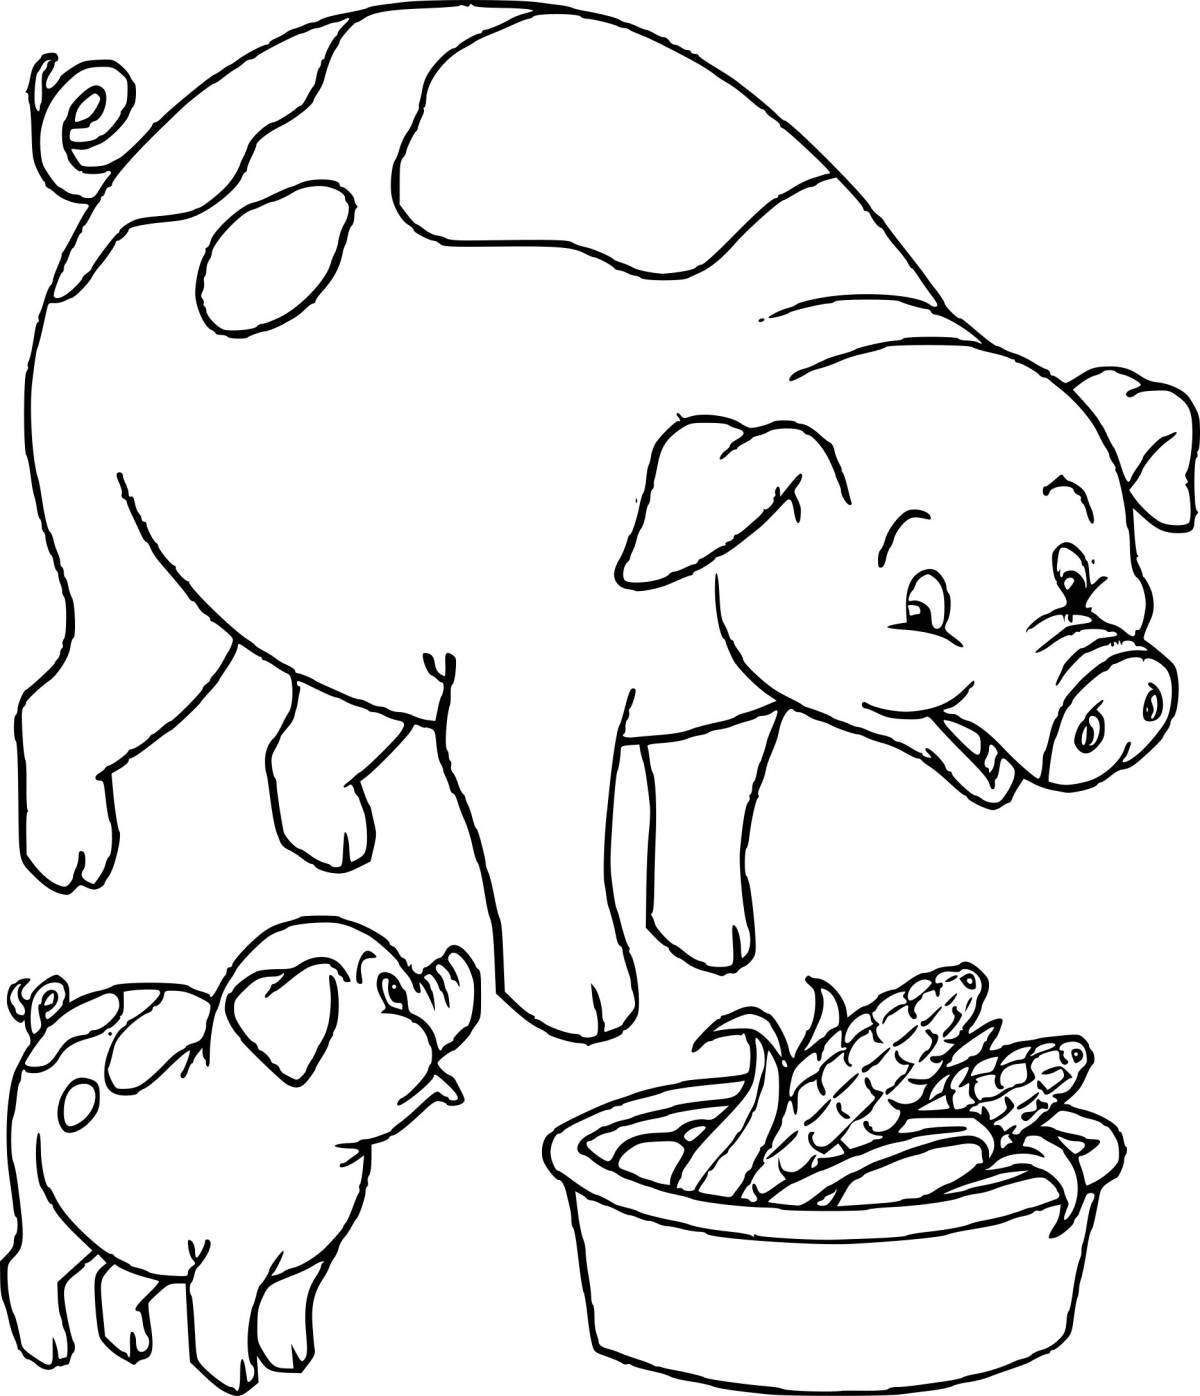 Adorable animal coloring pages for 5-7 year olds